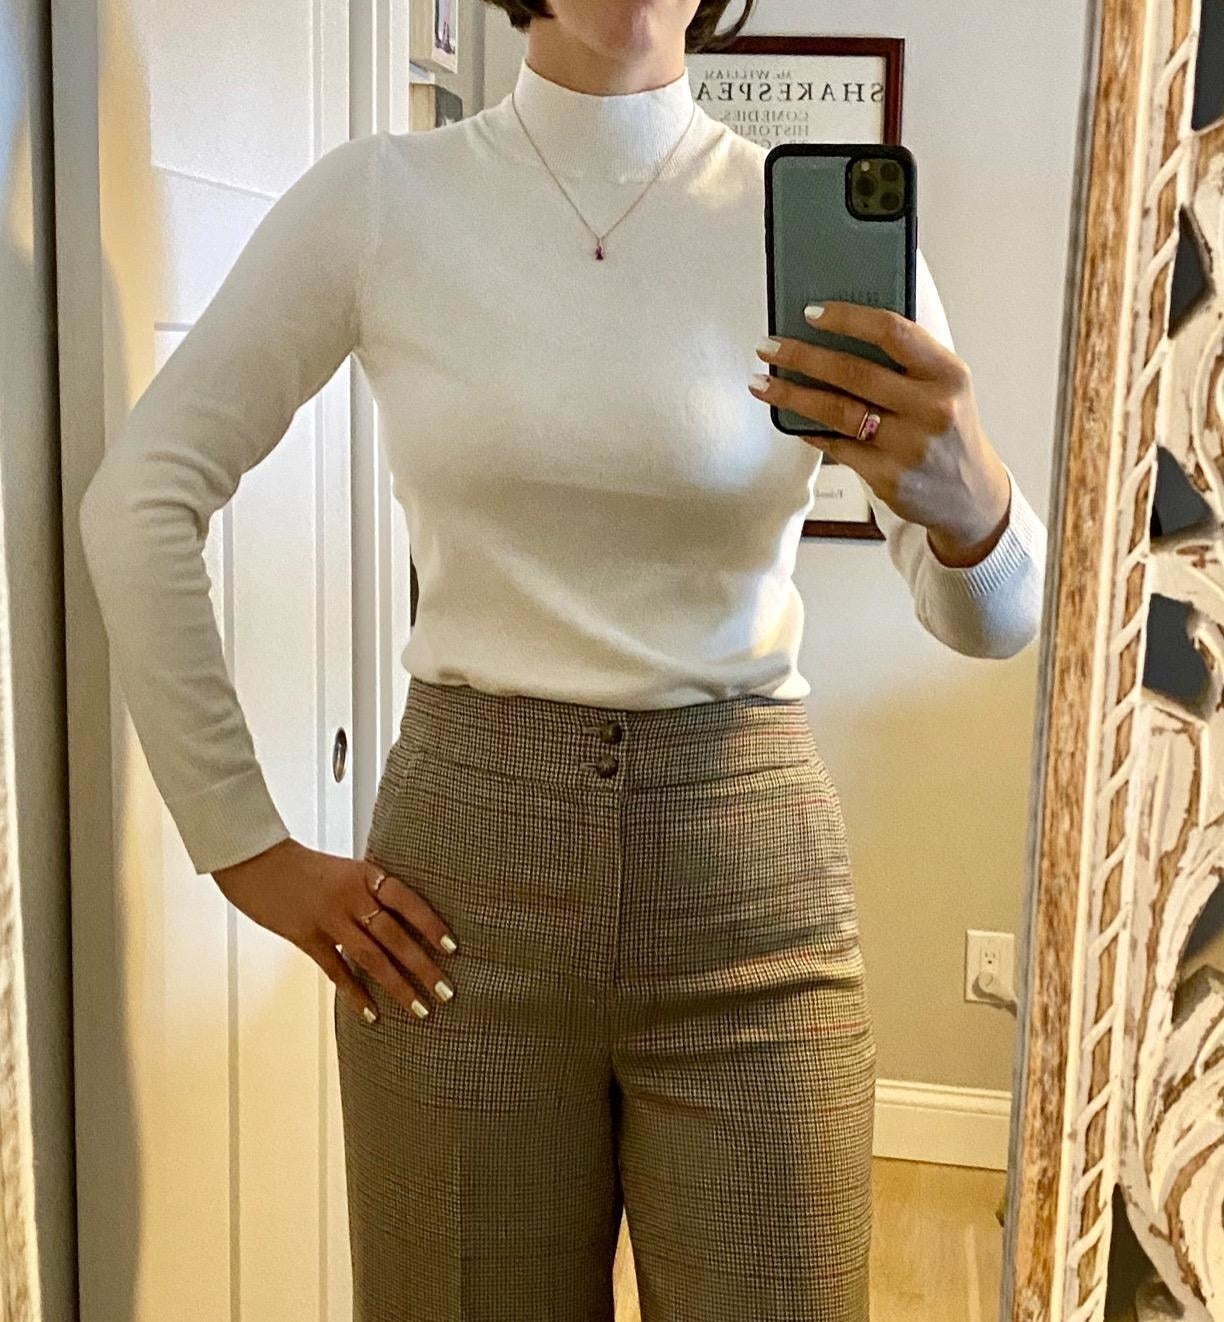 mirror selfie of a reviewer wearing a cream mock neck sweater tucked into brown pants